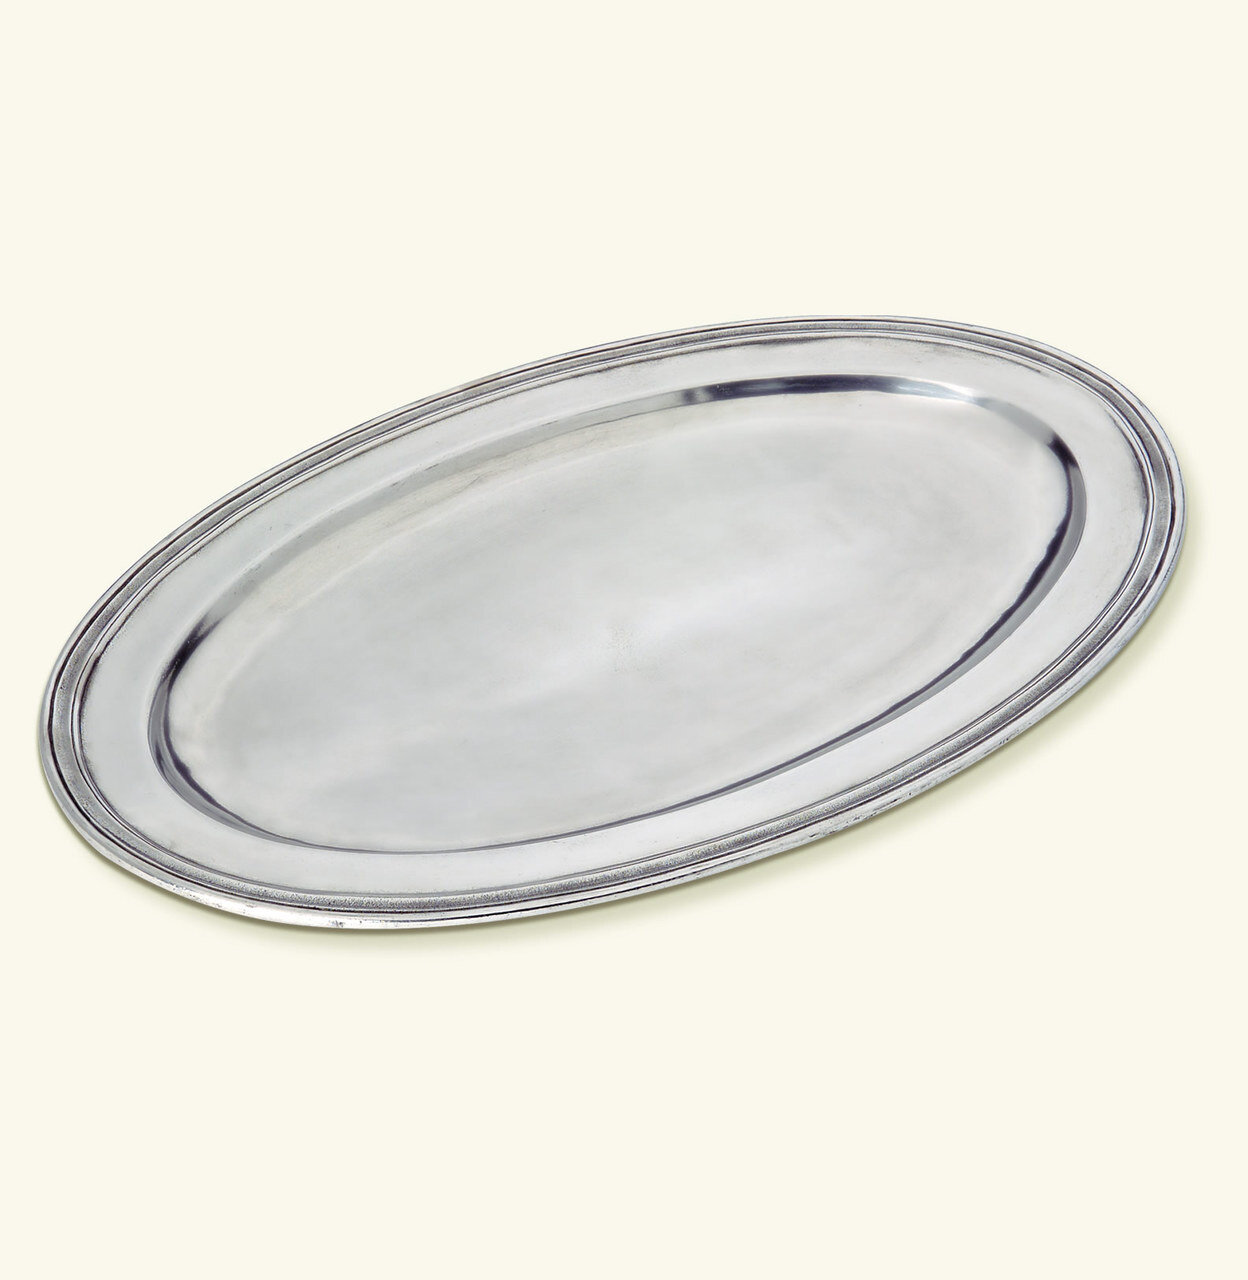 Match Pewter Oval Platter Large 1171